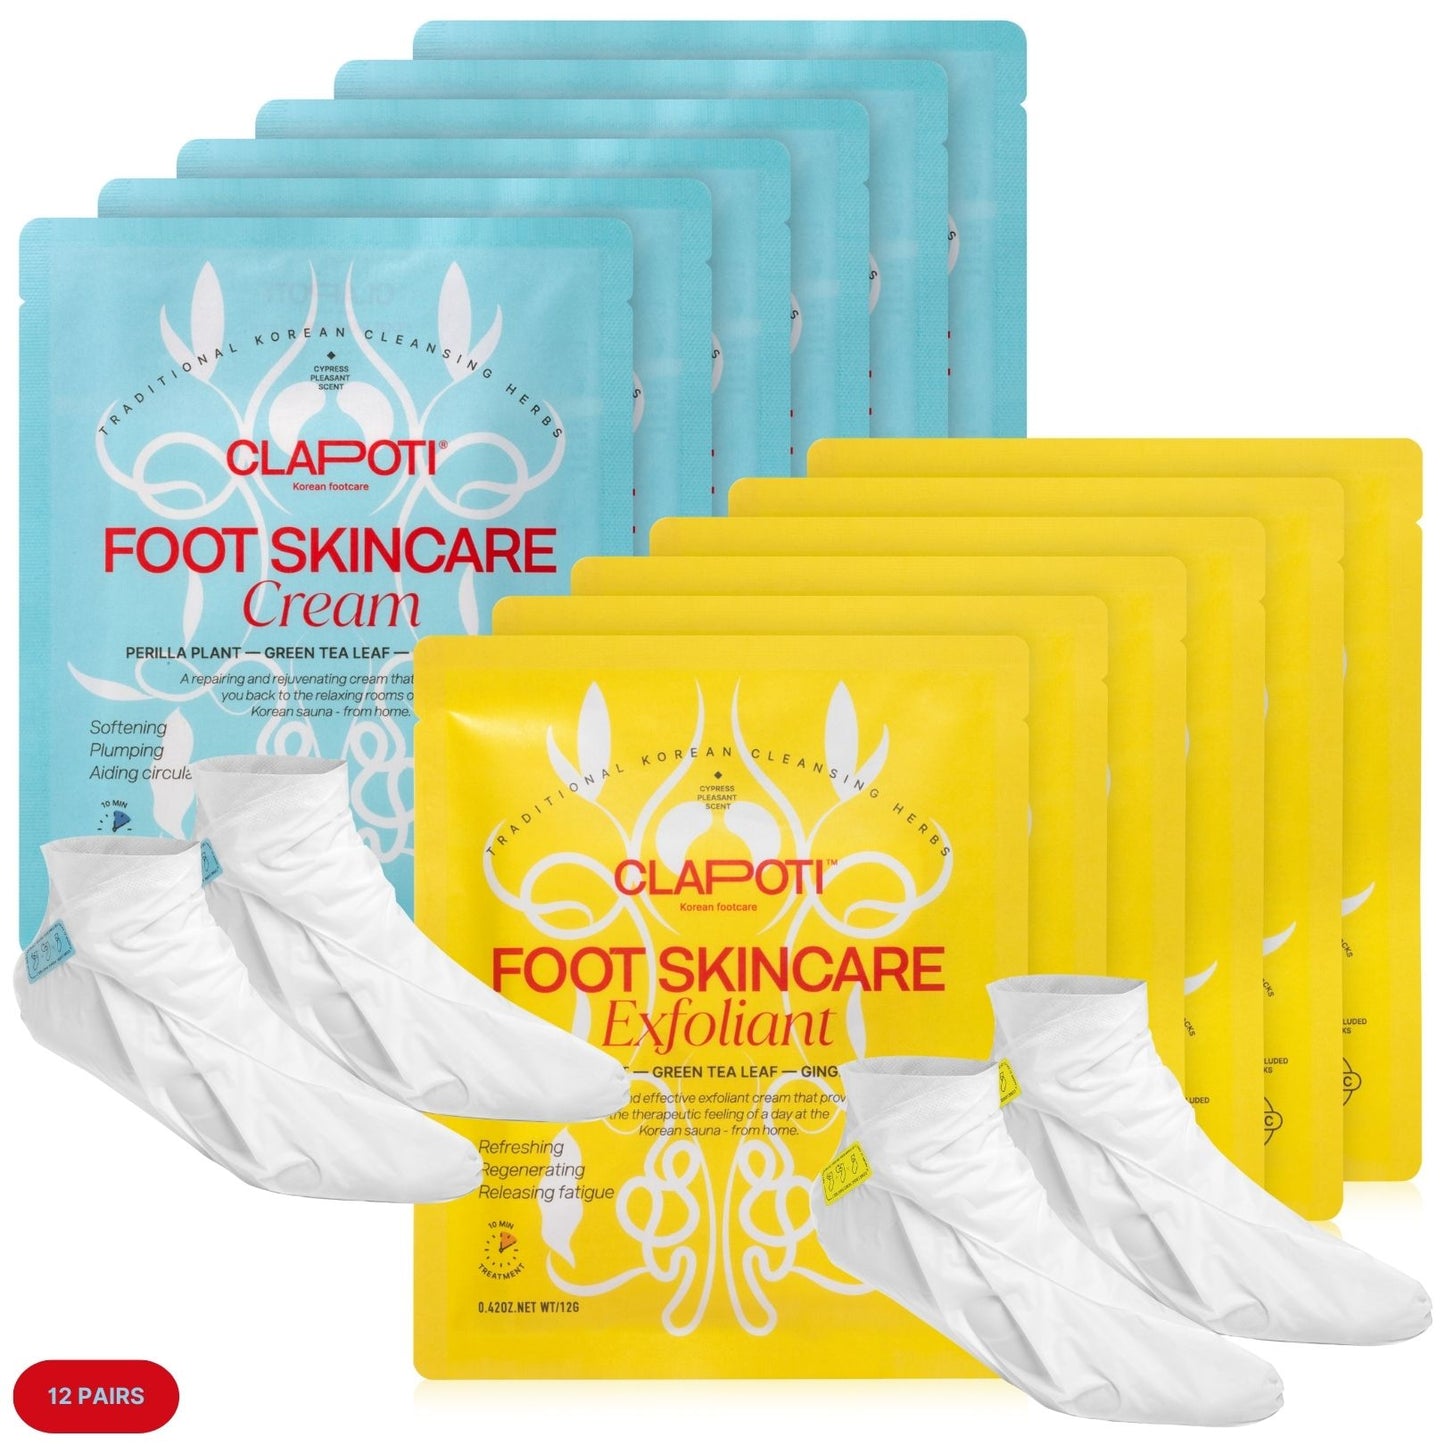 Multipack Organic Cleansing and Moisturizing Foot Masks